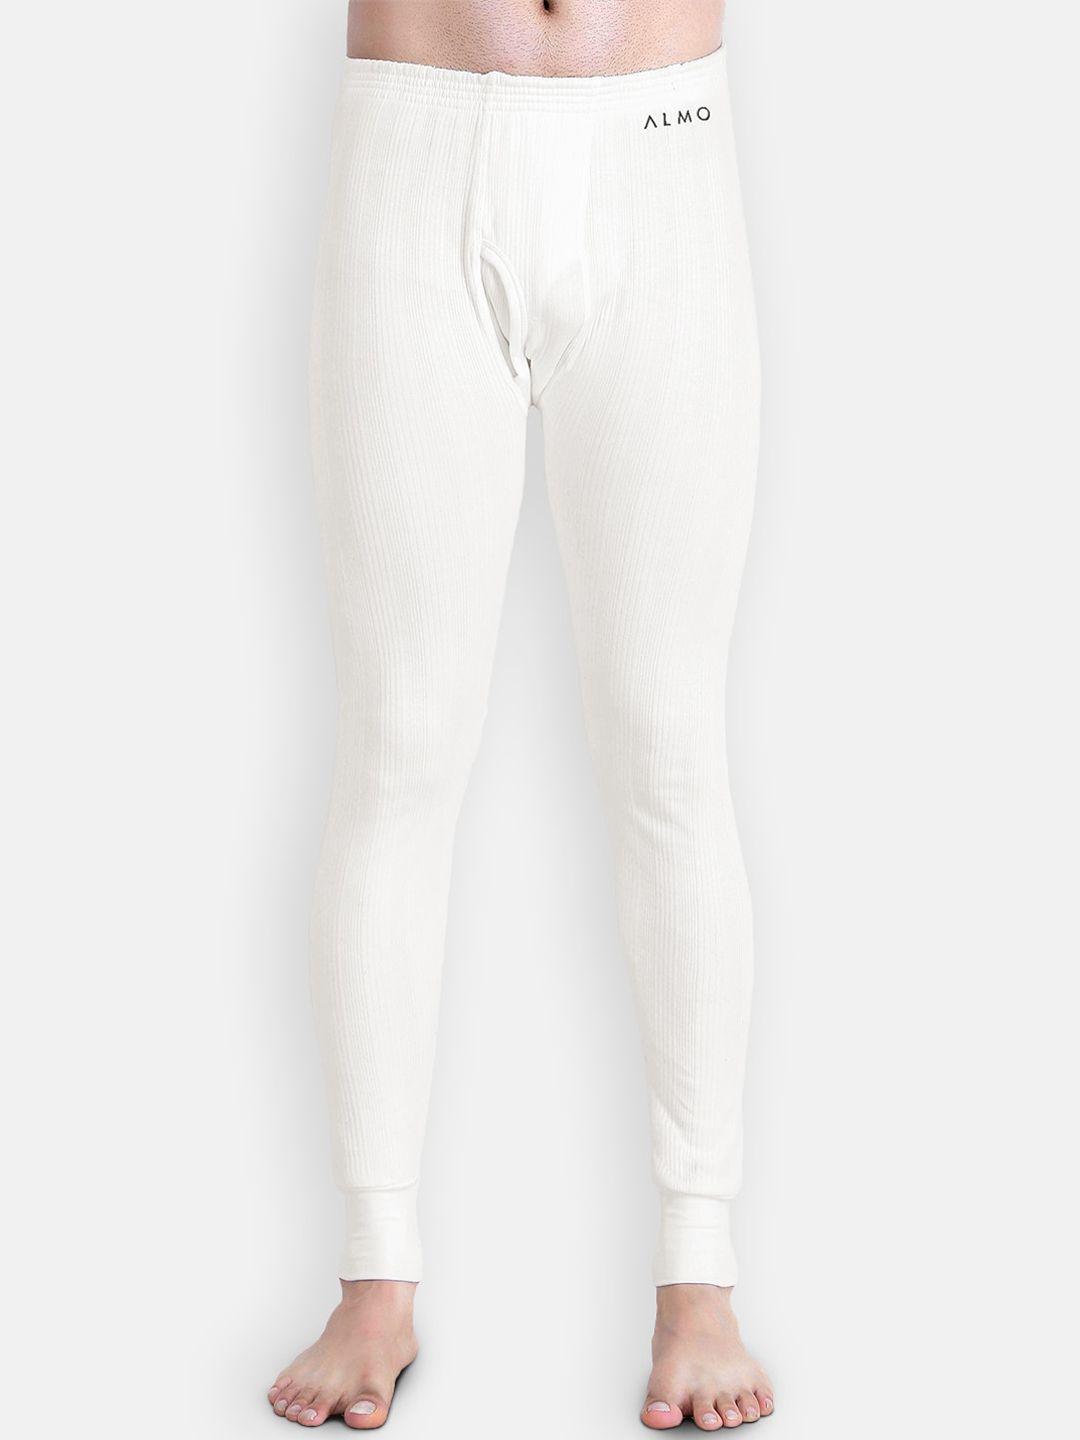 almo-wear-men-off-white-solid-cotton-thermal-bottoms